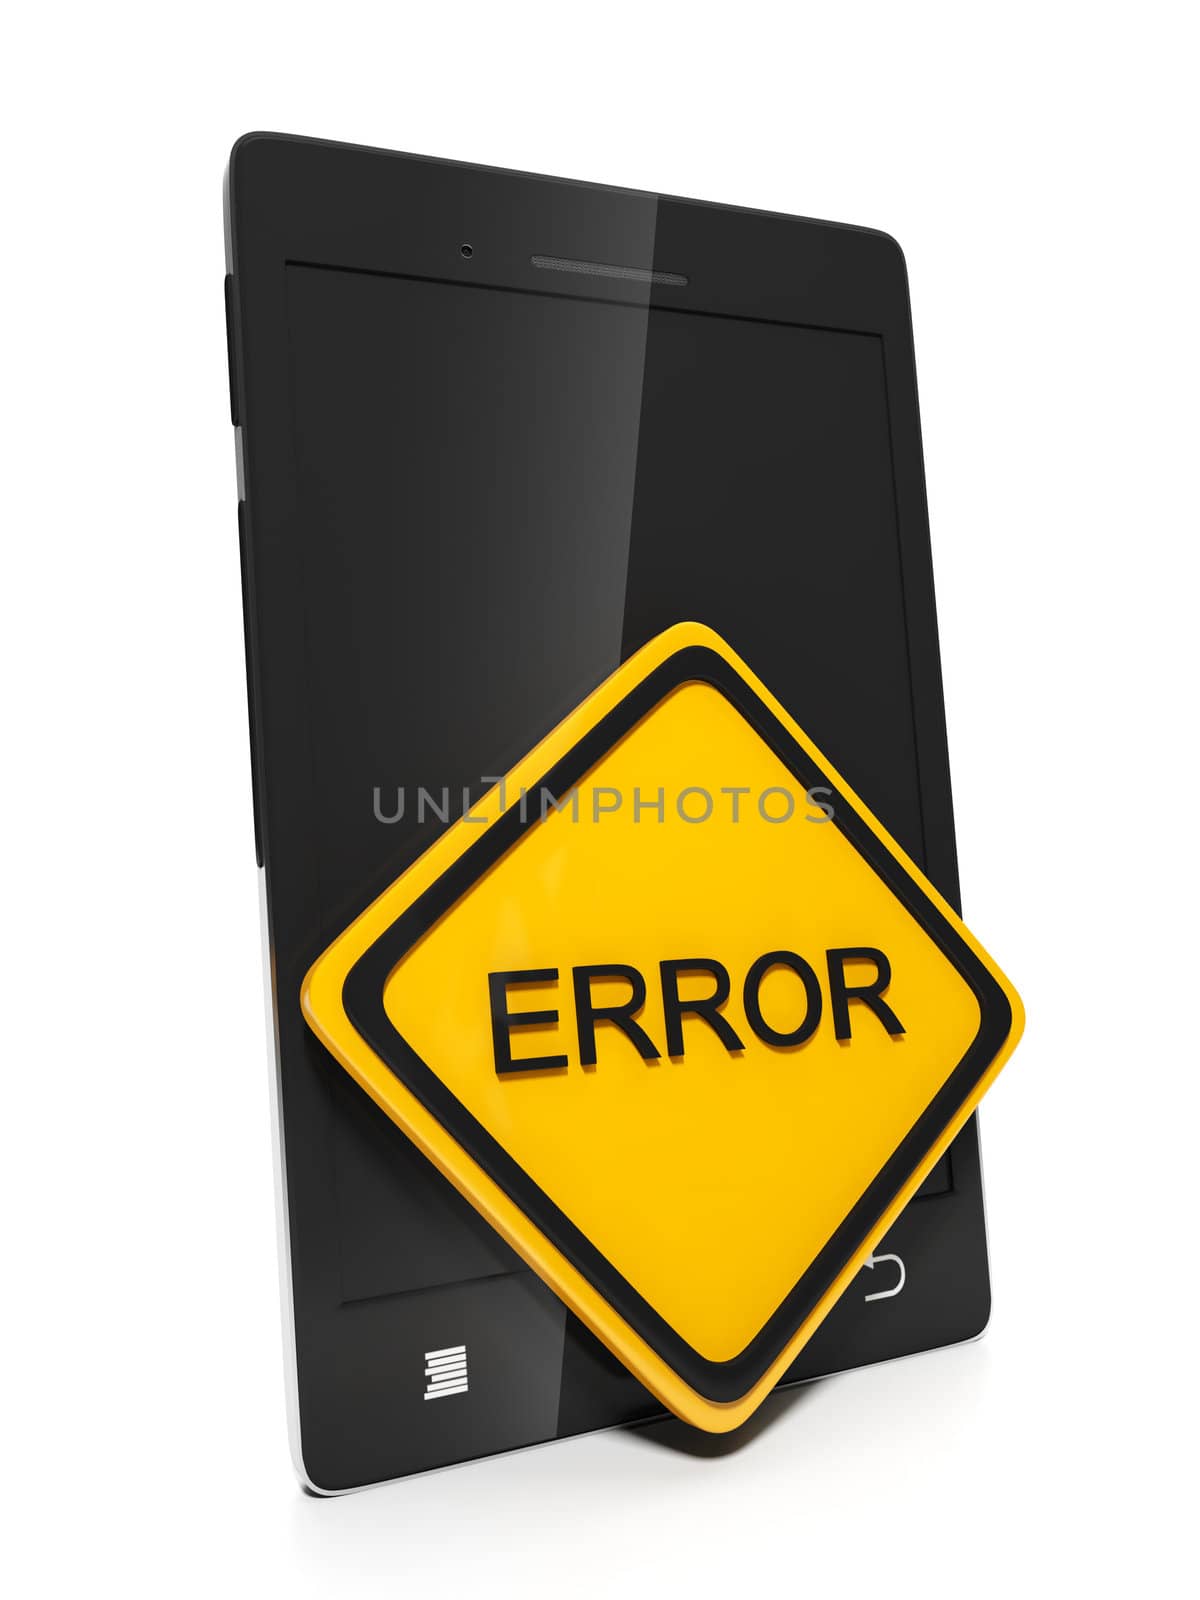 Mobile phone with a sign error. Mobile phones